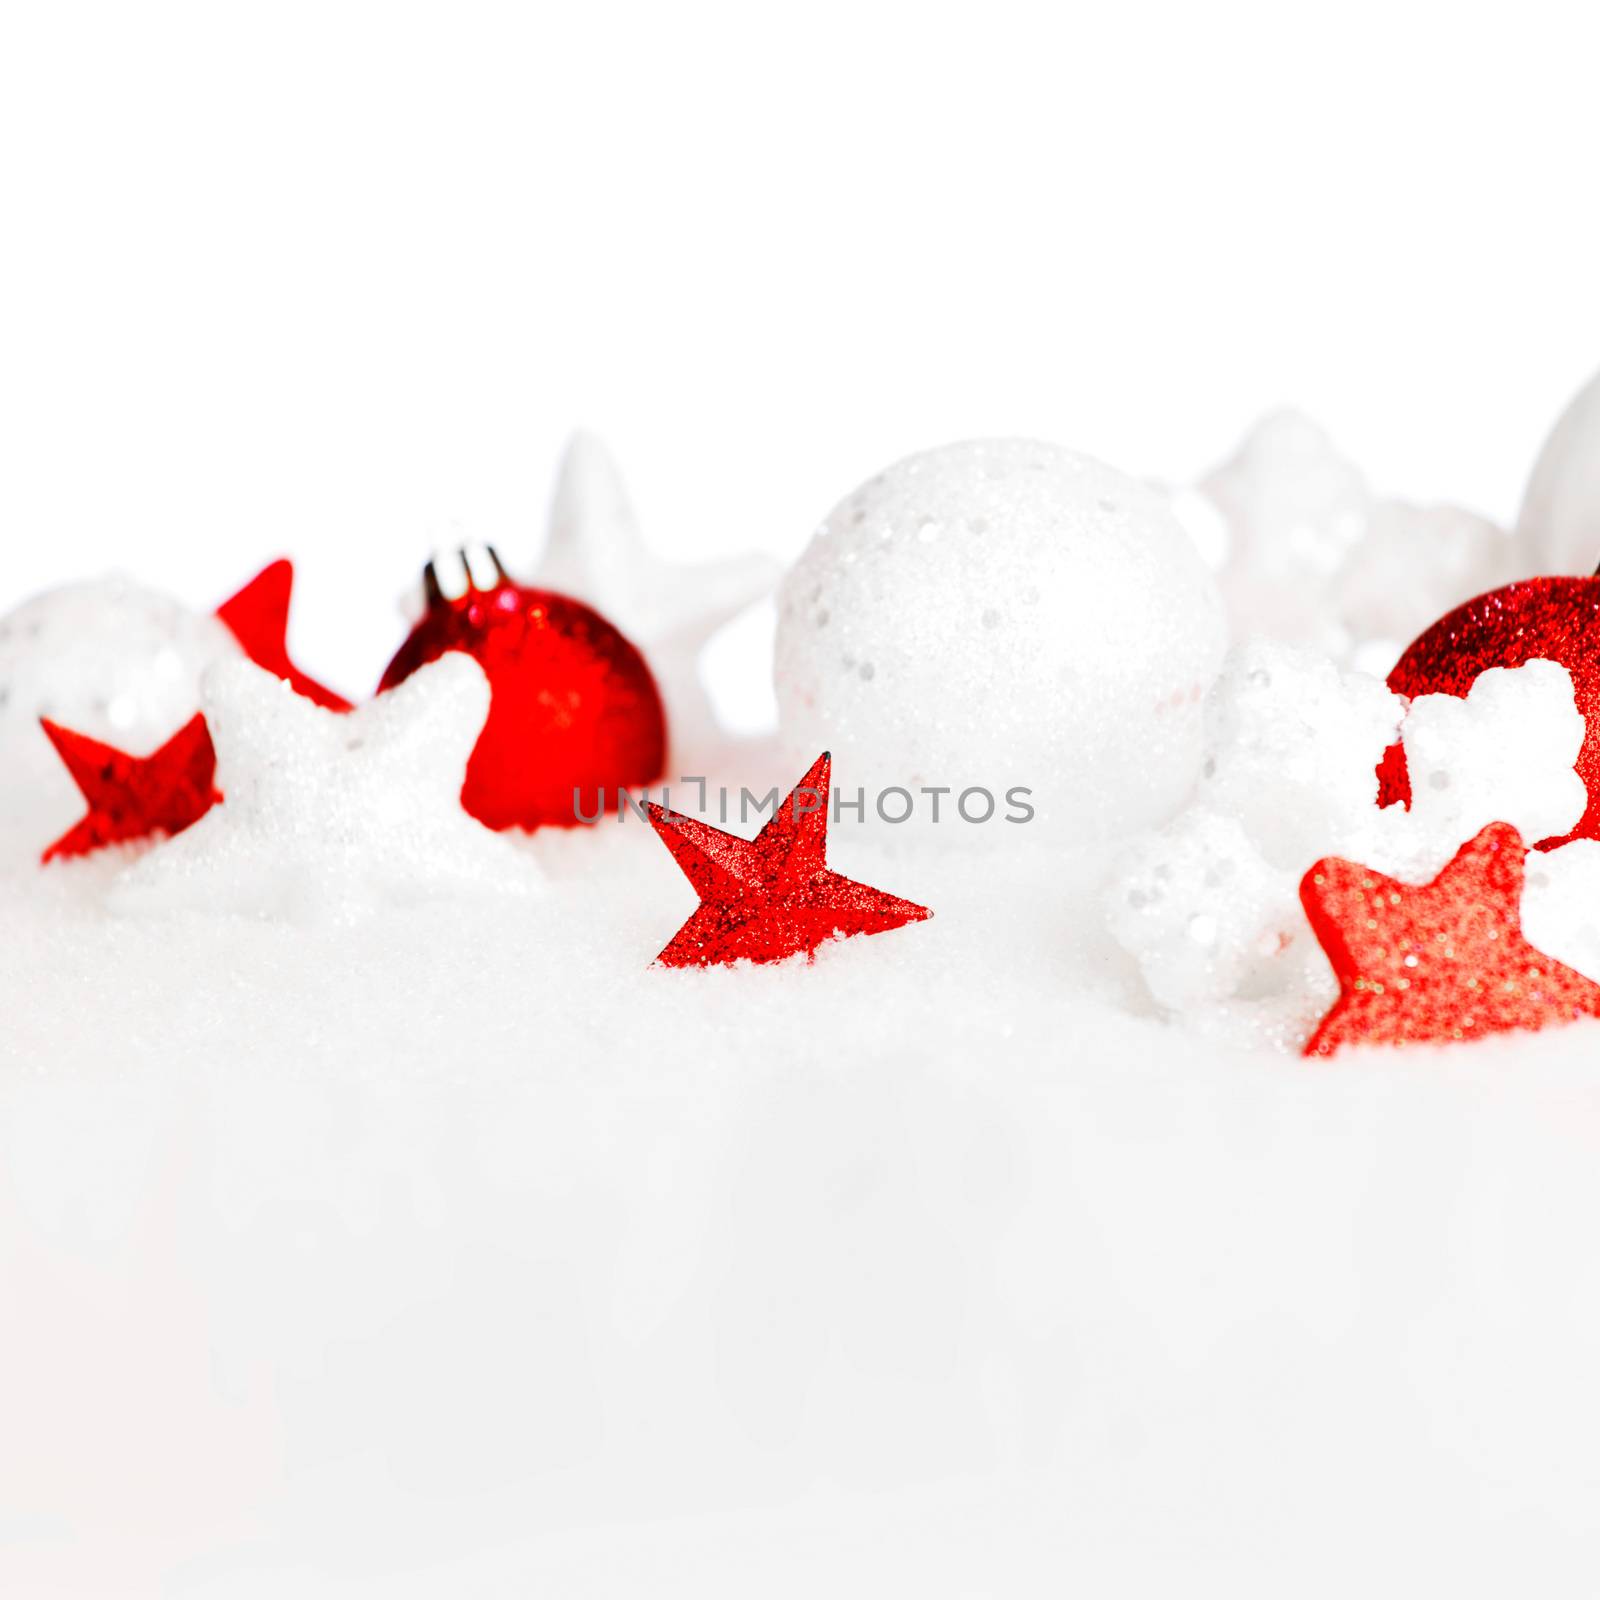 Christmas card with beautiful decorations in snow on white